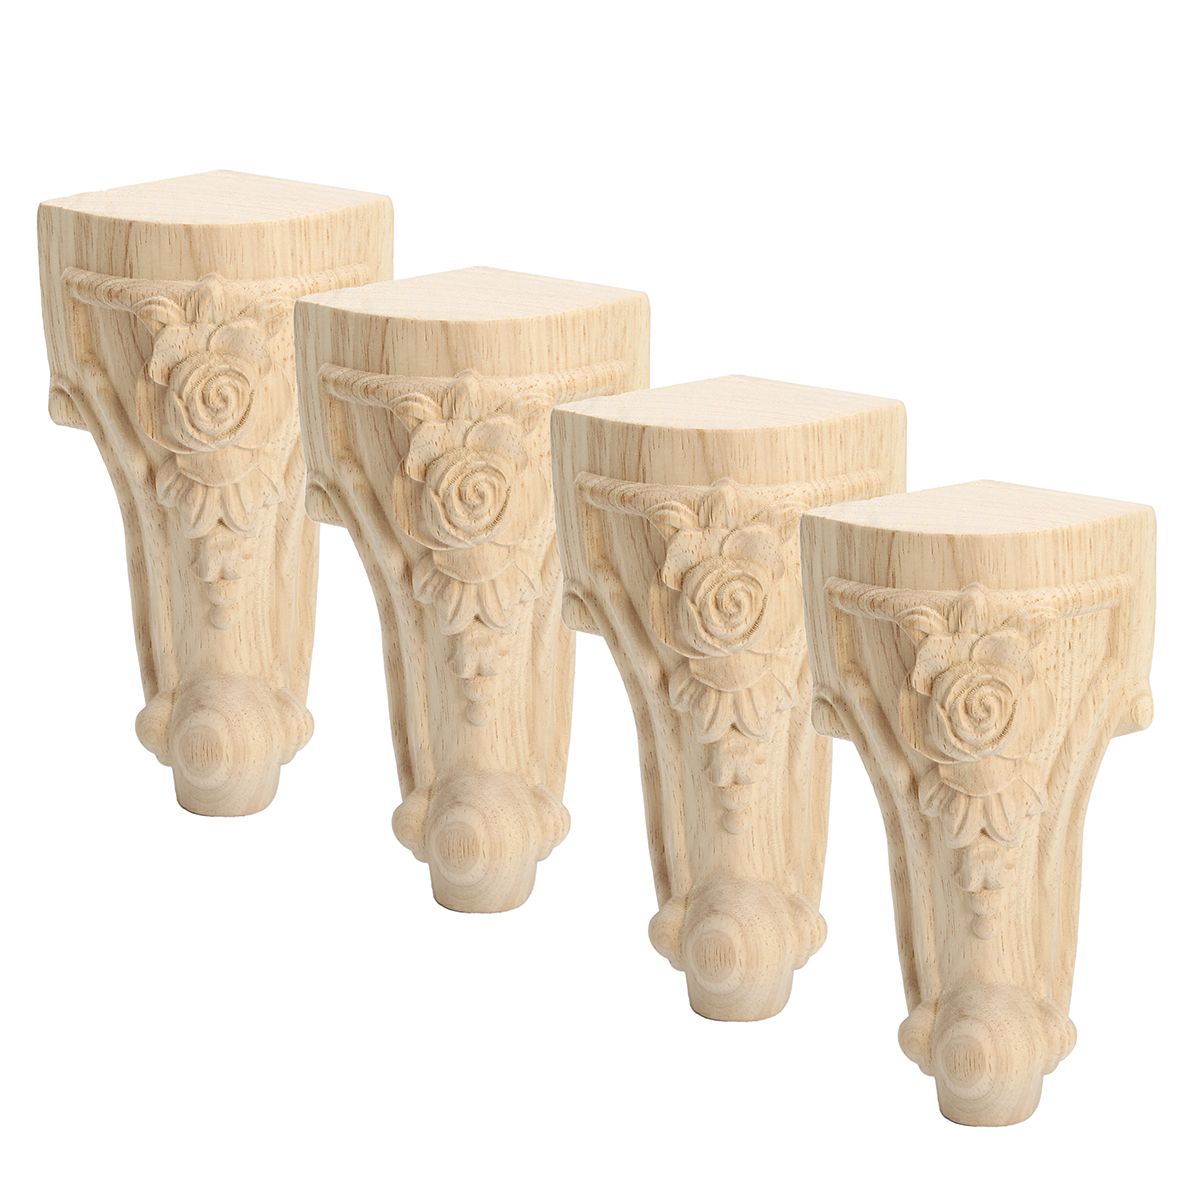 4Pcs-Solid-Wood-Carved-Furniture-Foot-Leg-Support-TV-Cabinet-Couch-Sofa-European-Style-1457255